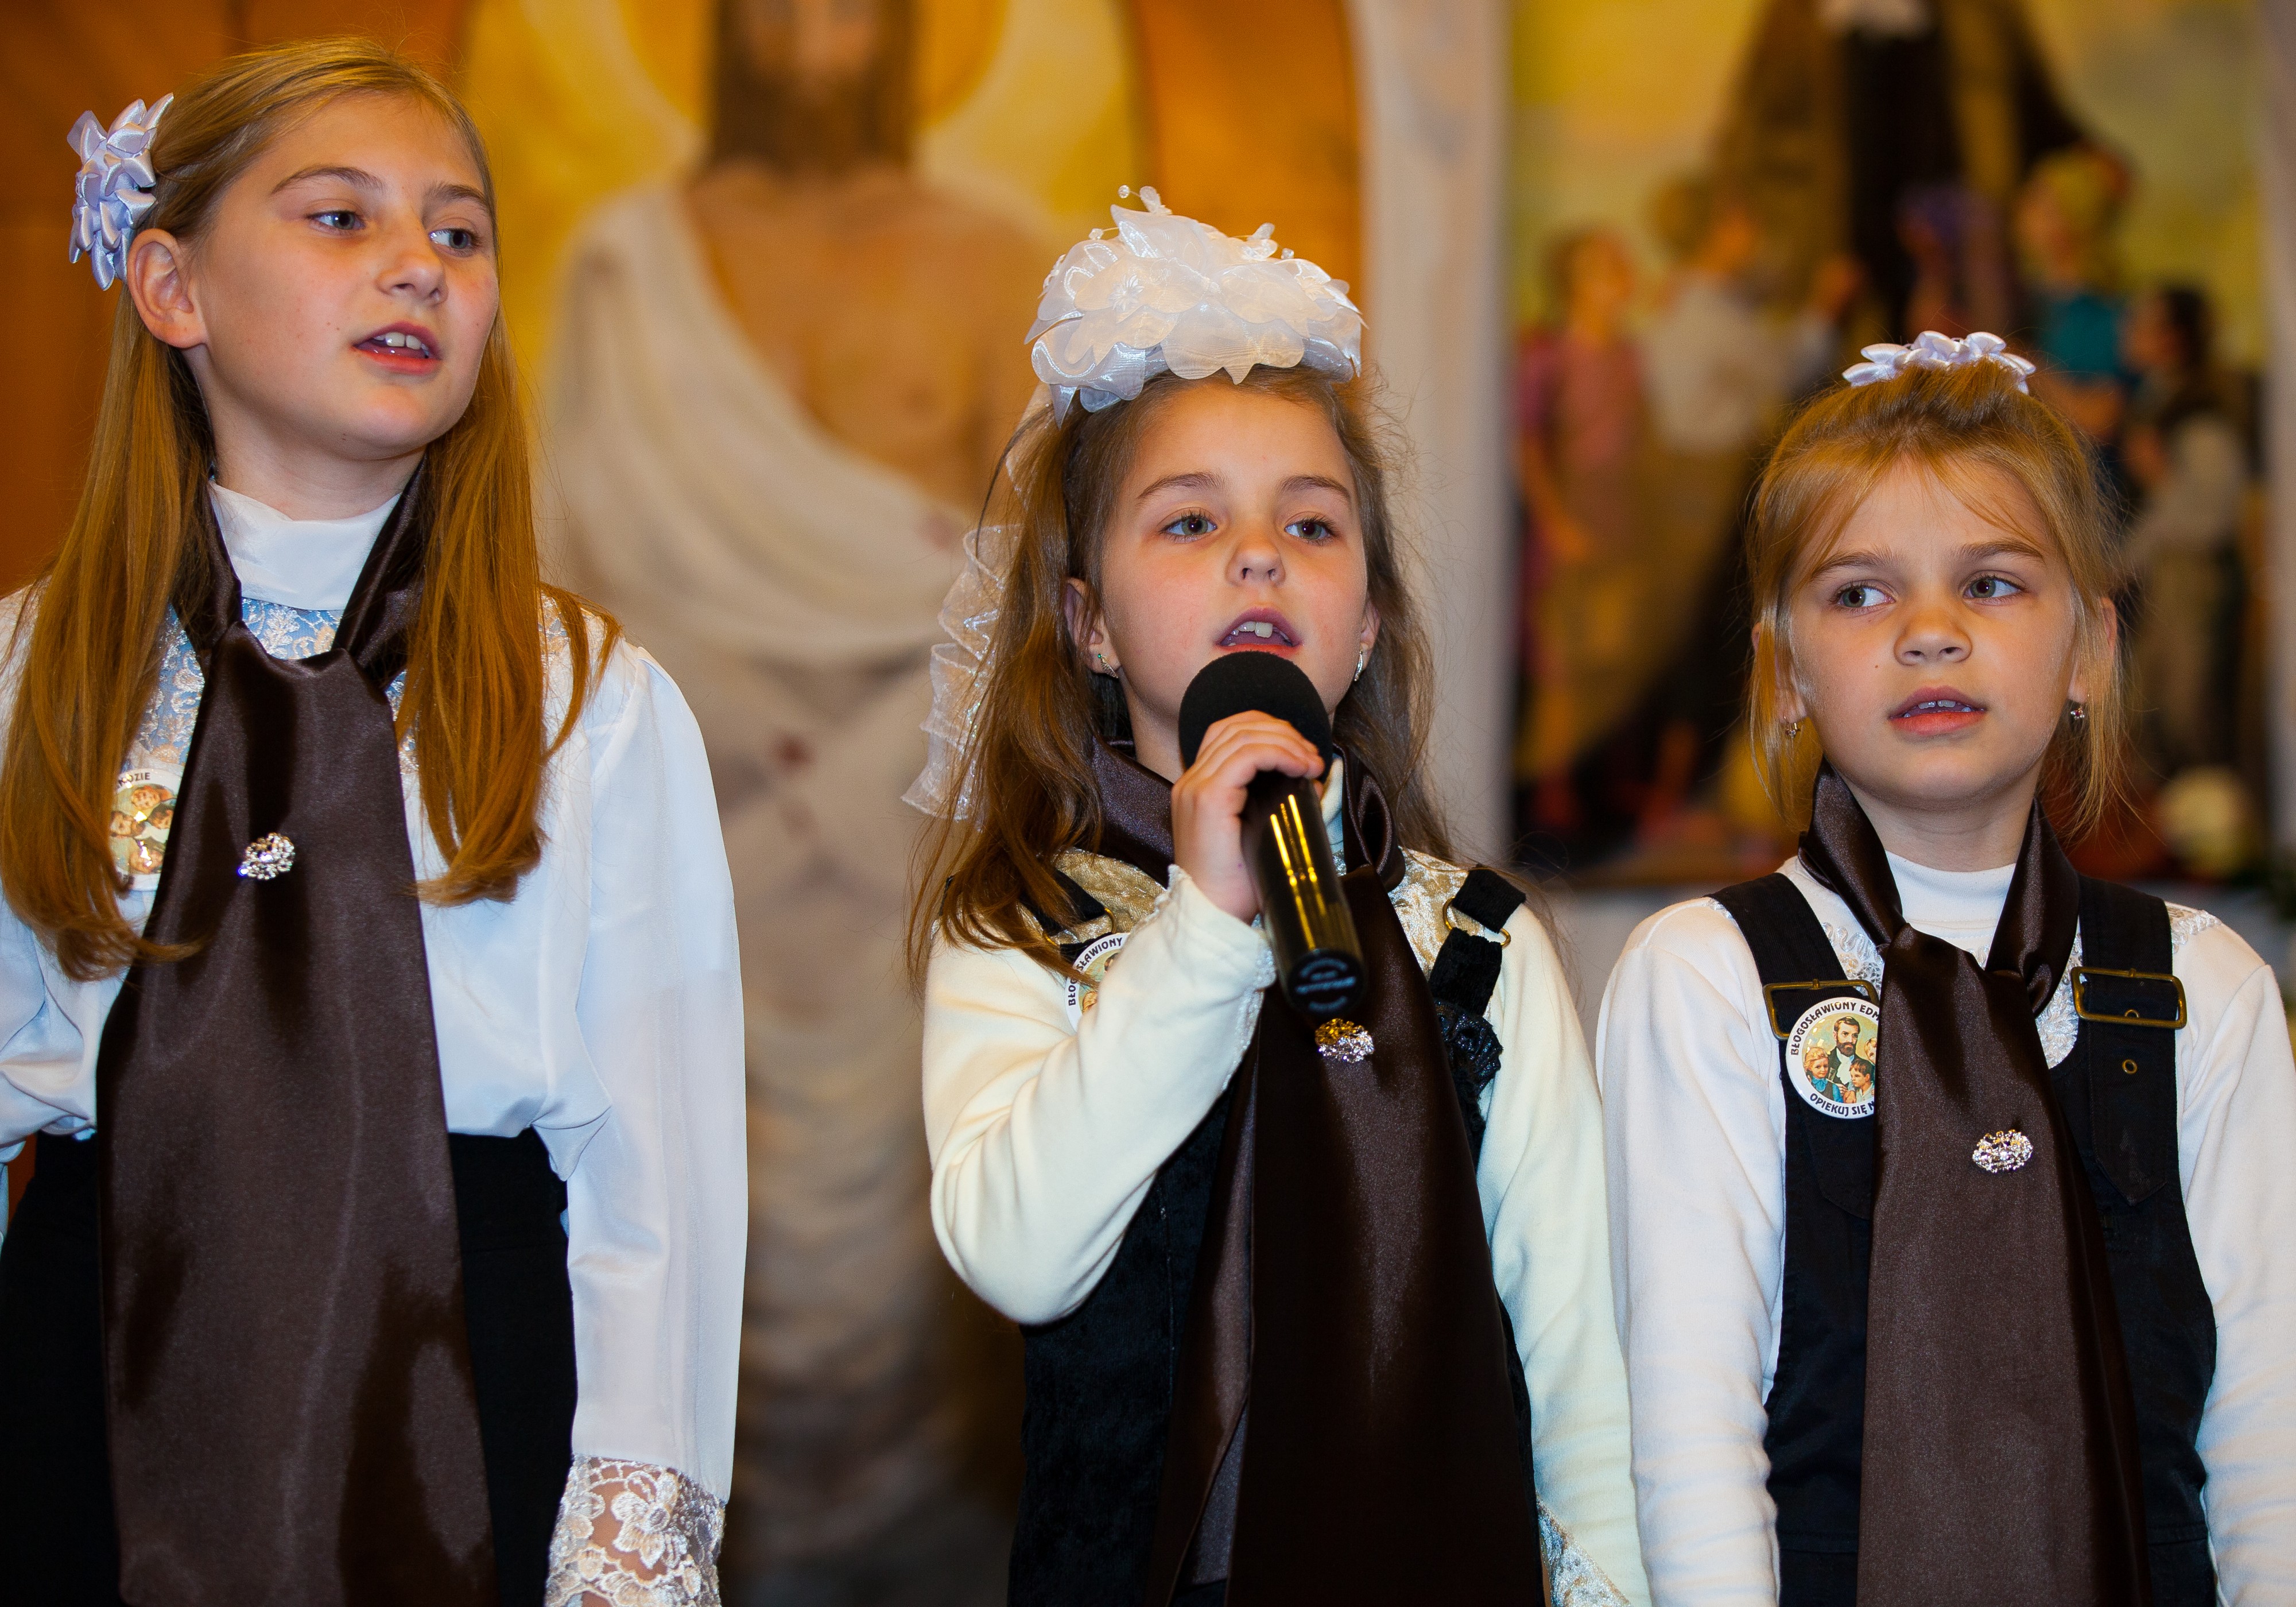 three young girls performing in a Catholic chapel in November 2013